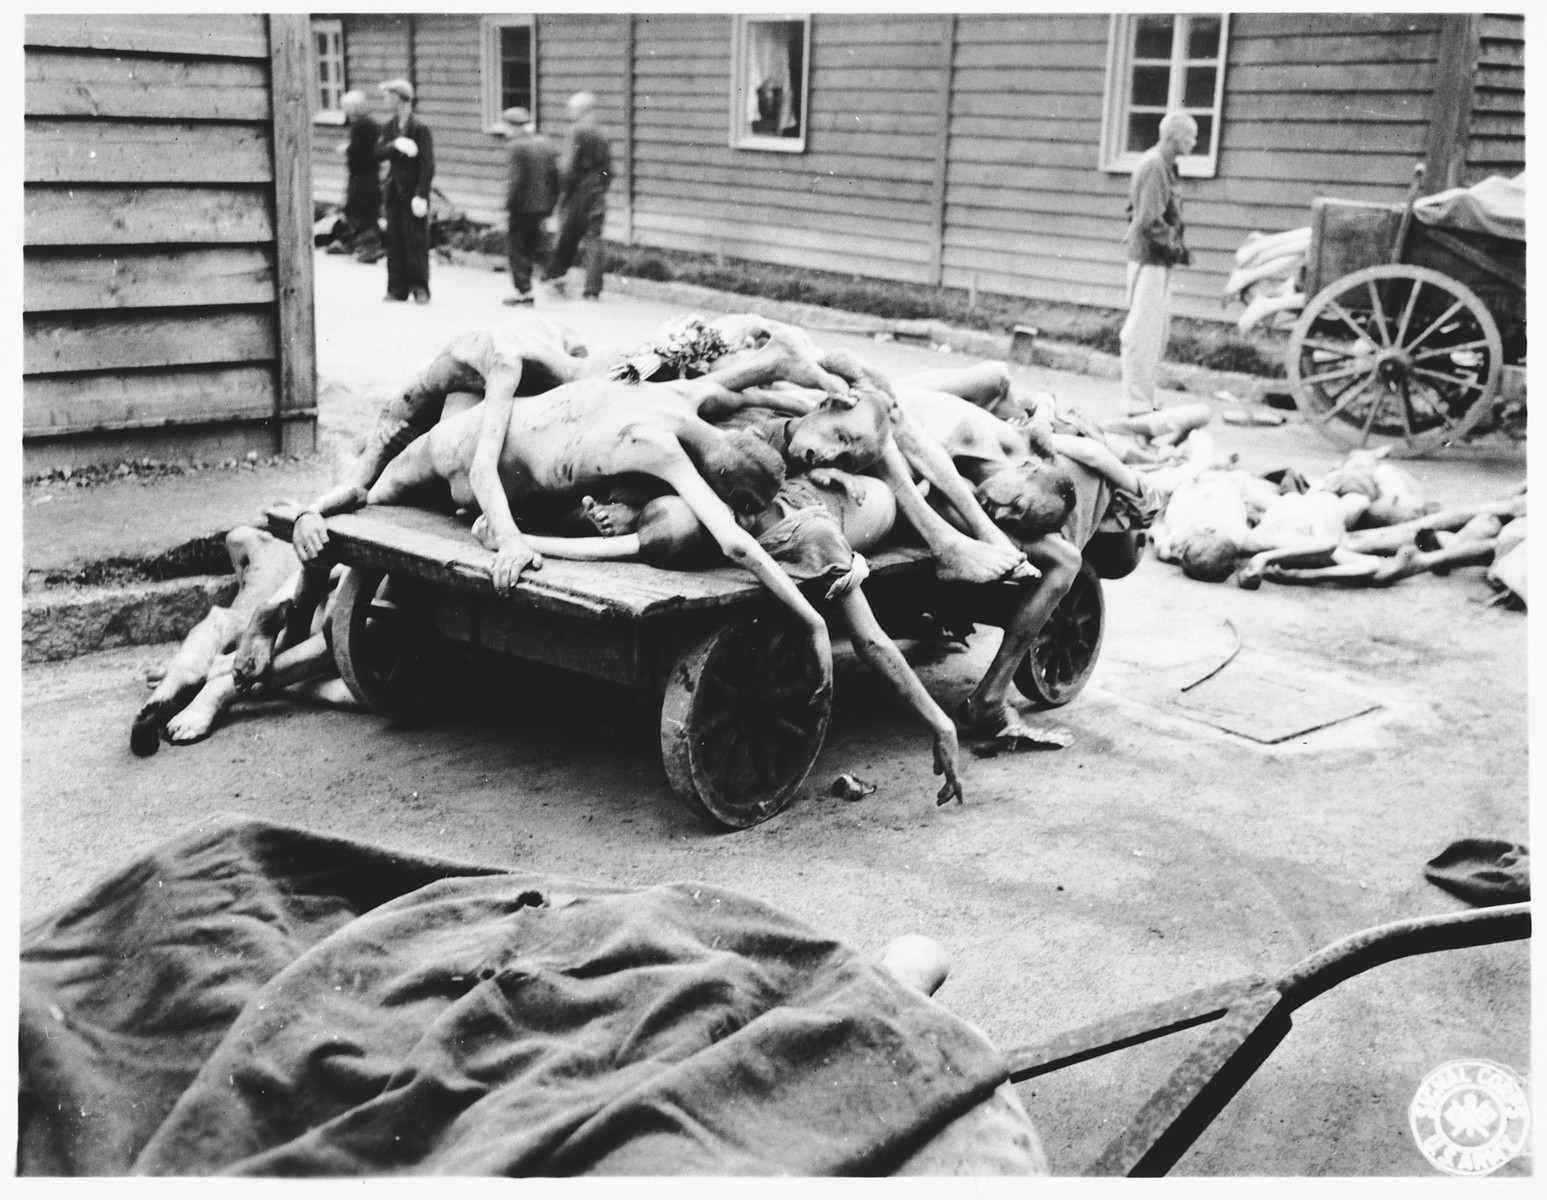 View of a cart laden with the bodies of prisoners who perished in the Gusen concentration camp.